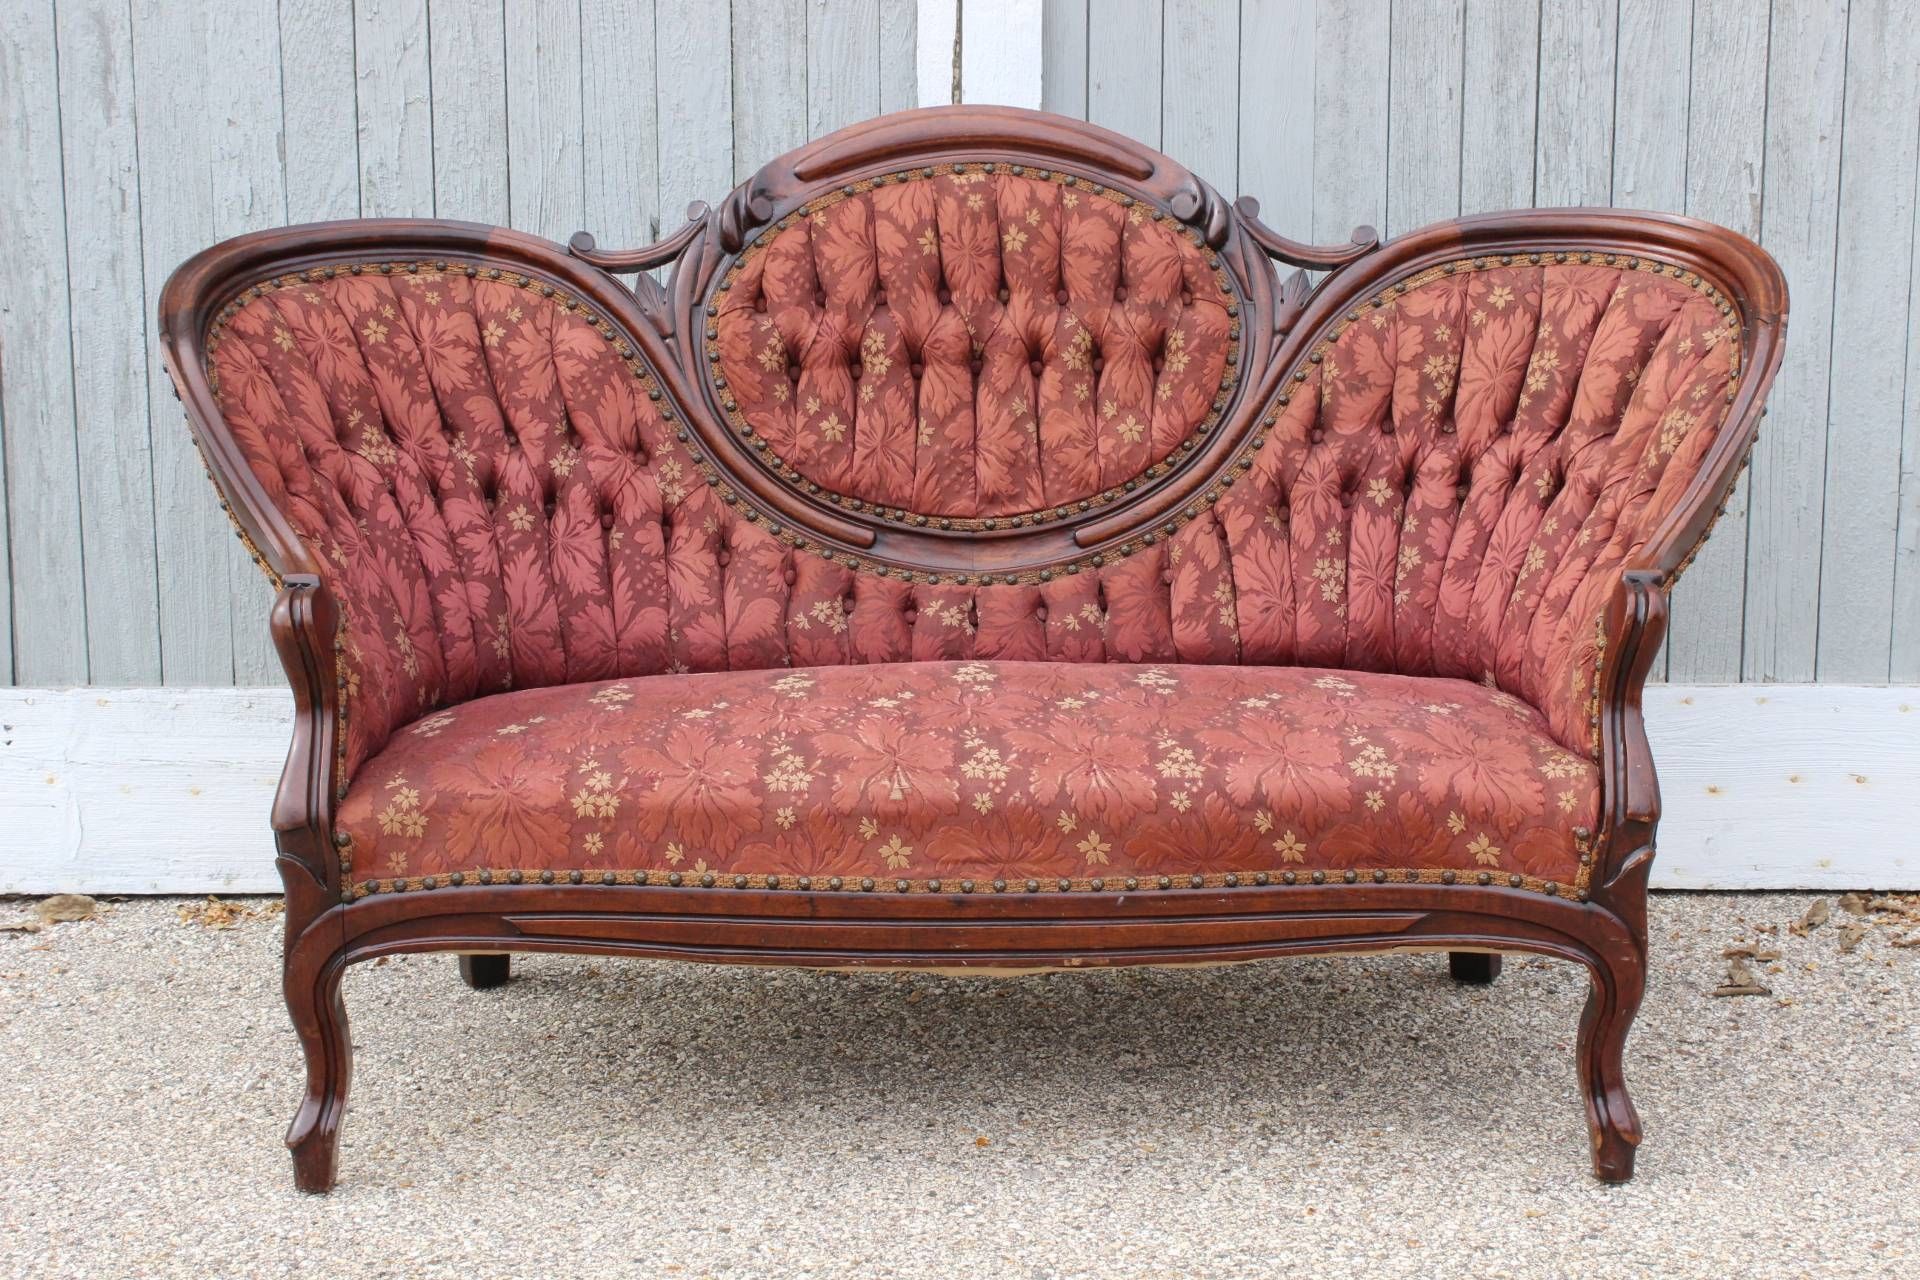 Furniture: Victorian Couches | Victorian Couch Styles | Antique In Vintage Sofa Styles (View 8 of 30)